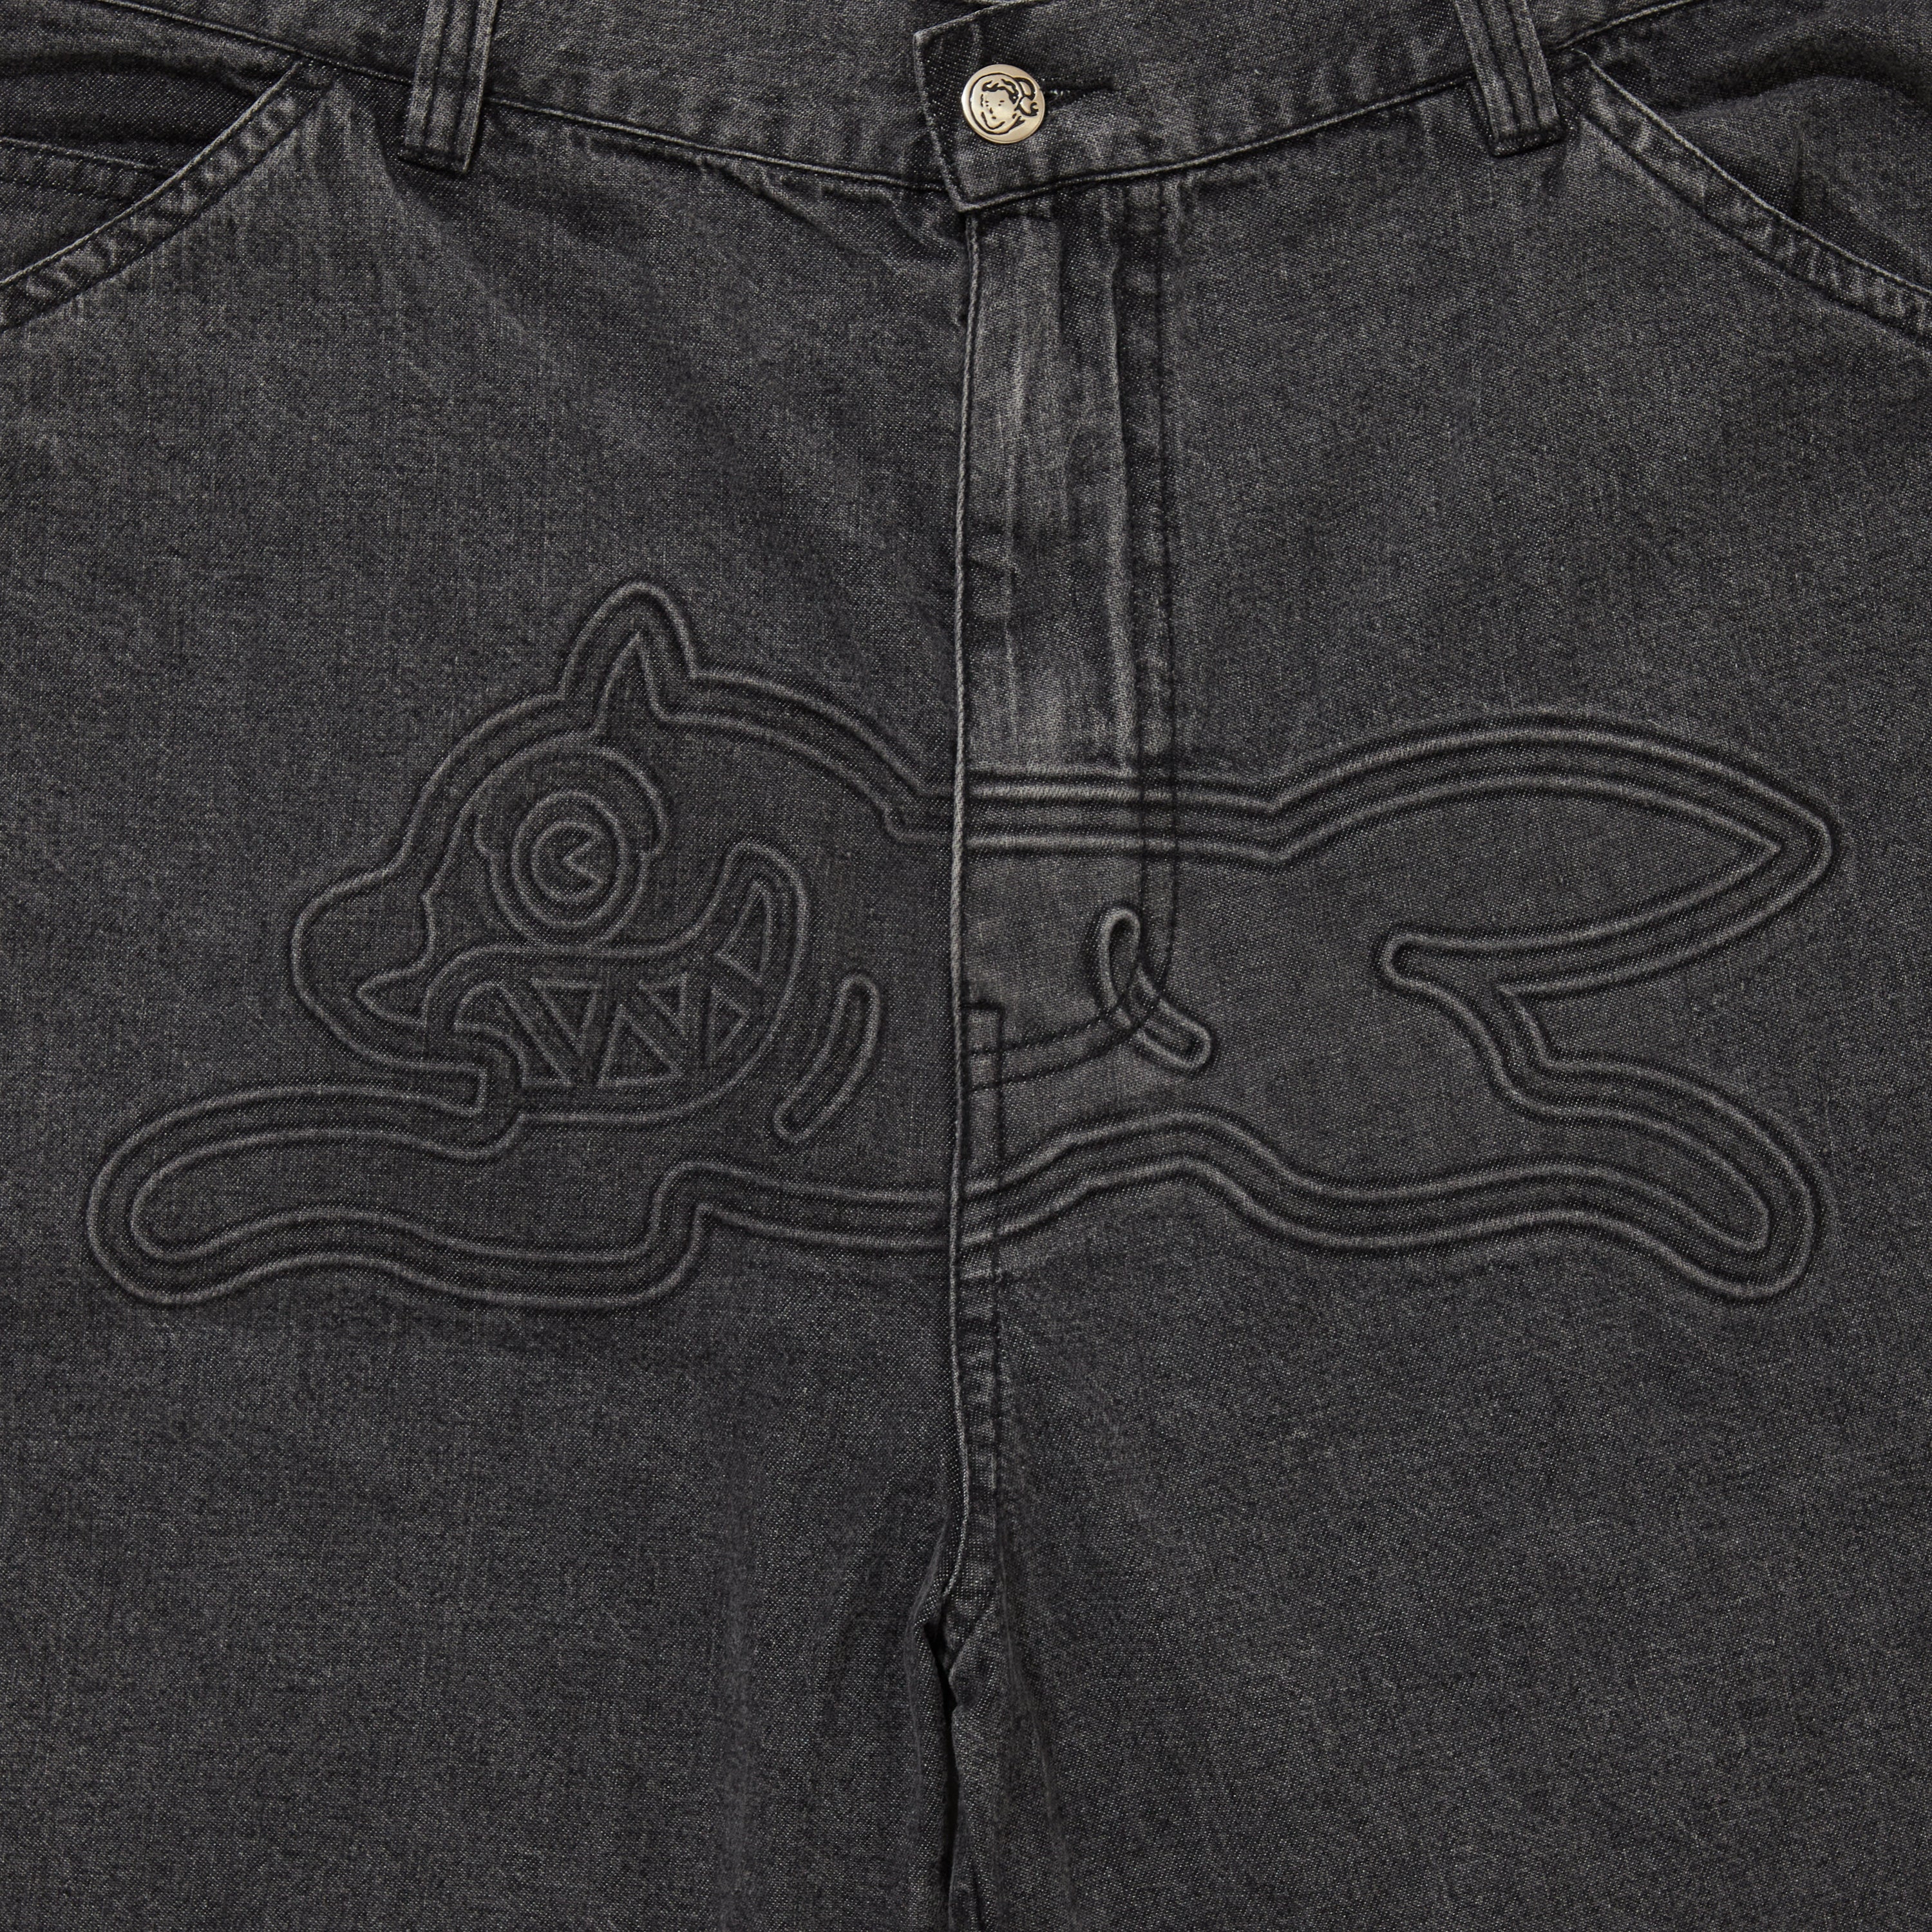 Load image into Gallery viewer, EMBOSS LOGO DENIM SHORTS
